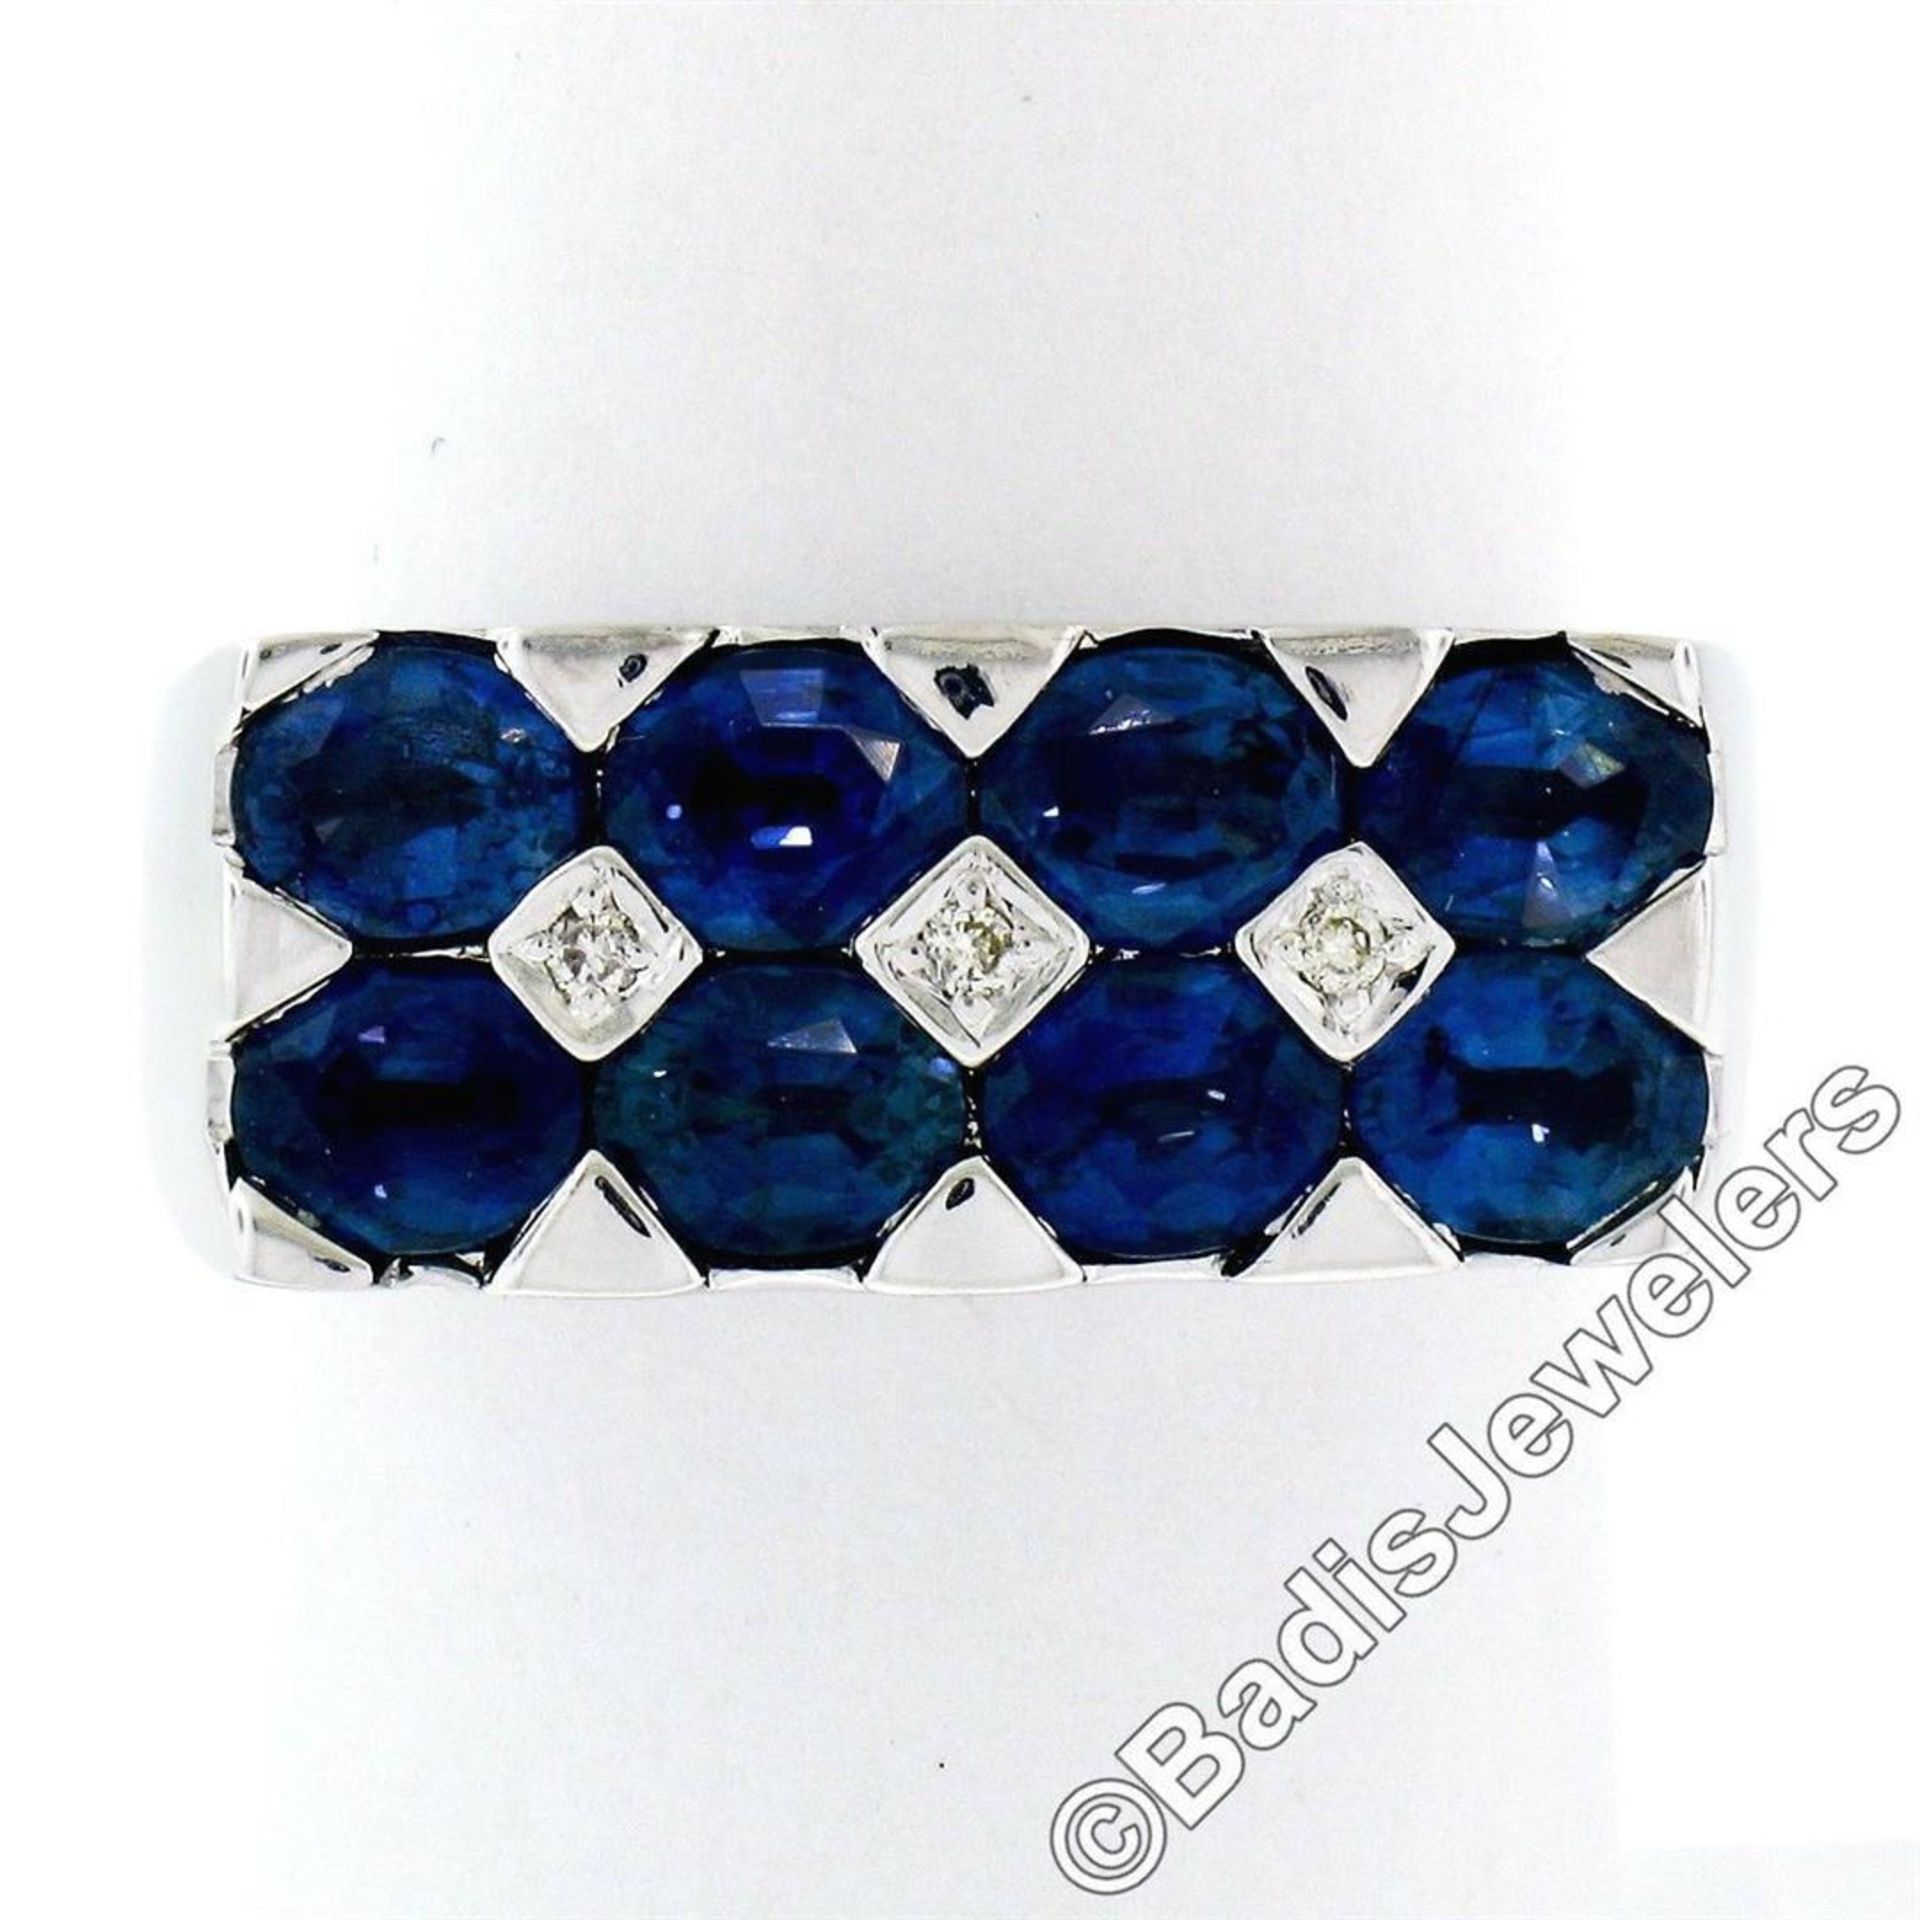 18kt White Gold 4.03 ctw Dual Row Oval Cut Sapphire & Diamond Band Ring - Image 4 of 9